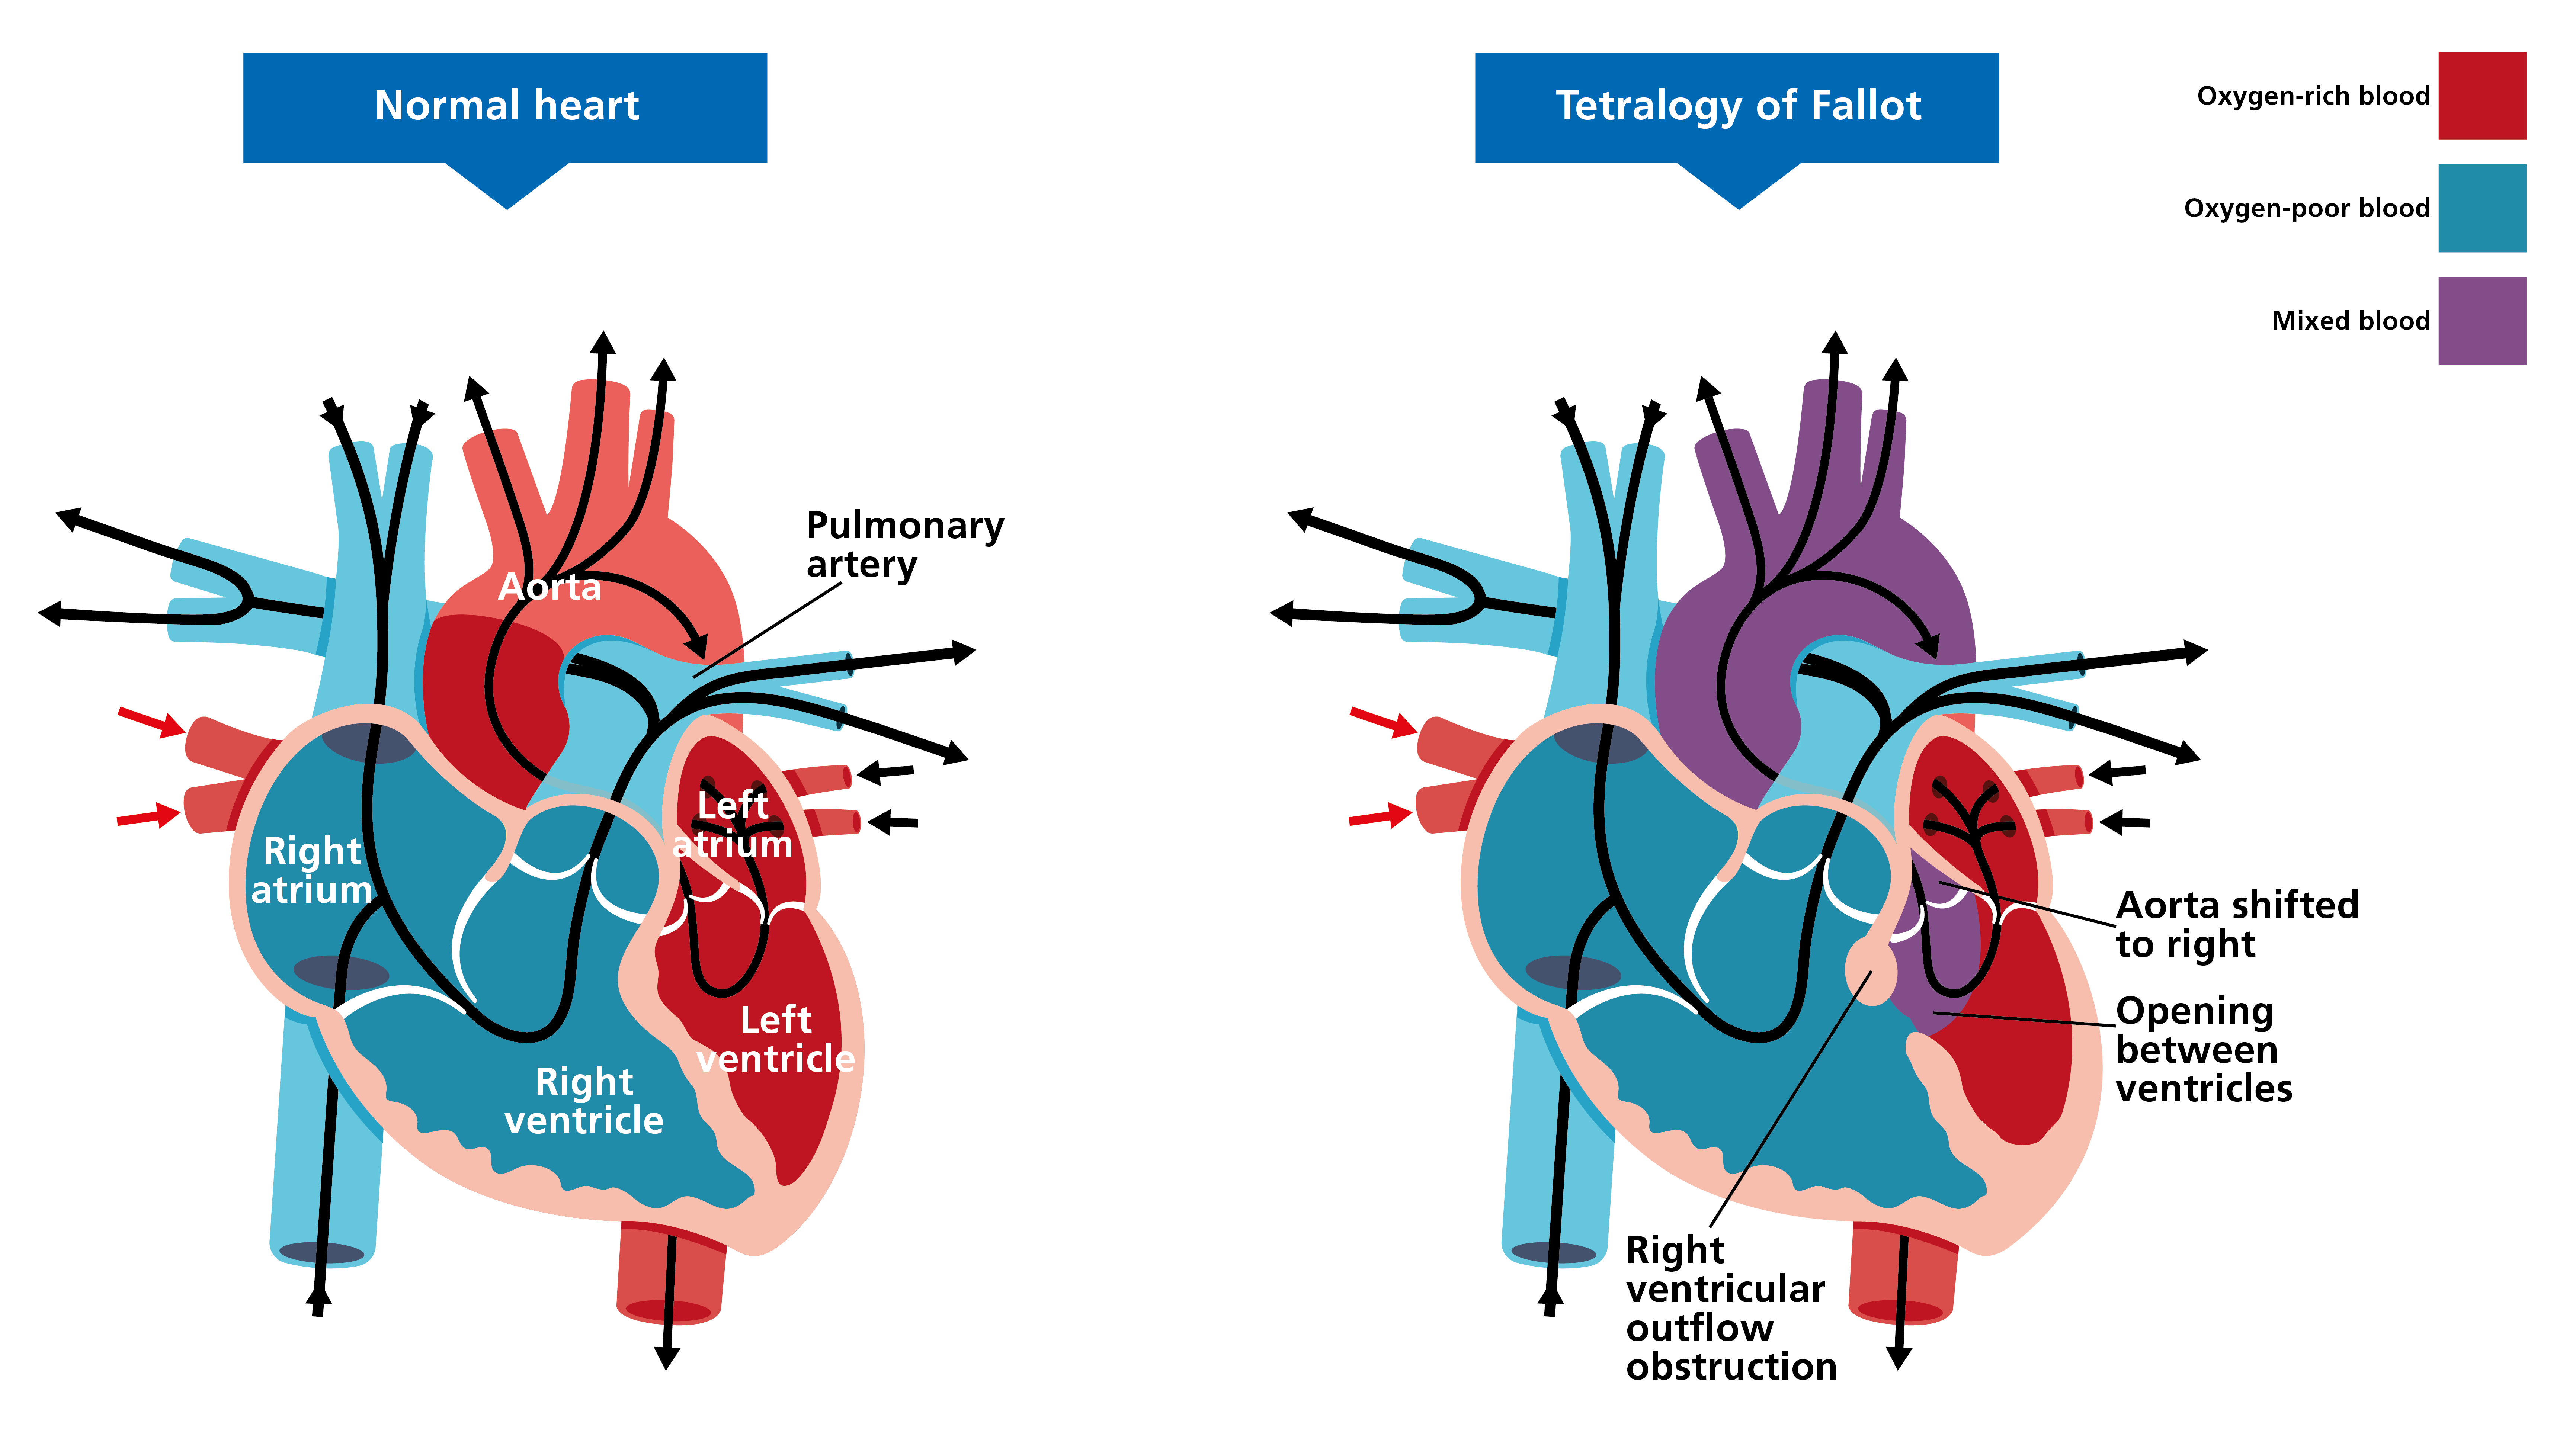 Two illustrated diagrams of hearts, side by side. The one on the left shows a normal heart. The one on the right shows a heart affected by Tetralogy of Fallot. Features of the affected heart include an aorta that has shifted to the right, an obstruction in the right ventricular outflow, and an opening between the ventricles.